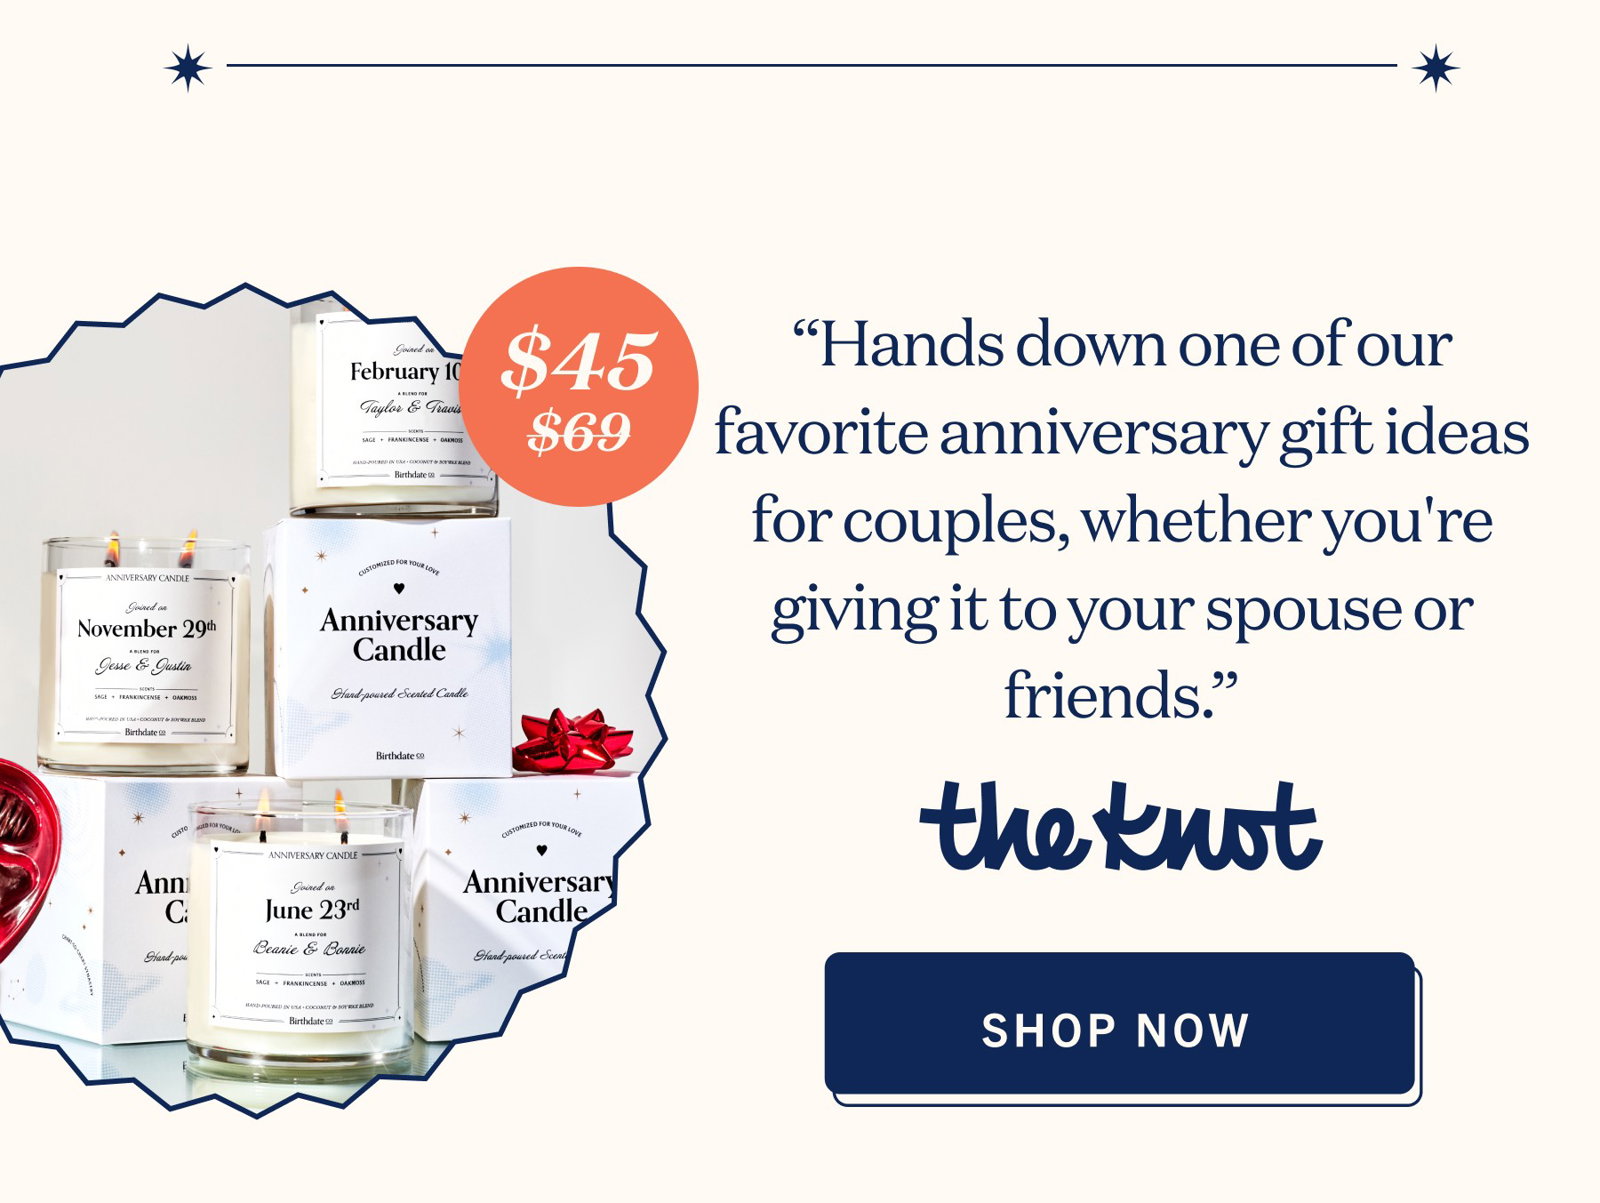 “Hands down one of our favorite anniversary gift ideas for couples, whether you're giving it to your spouse or friends.” SHOP NOW